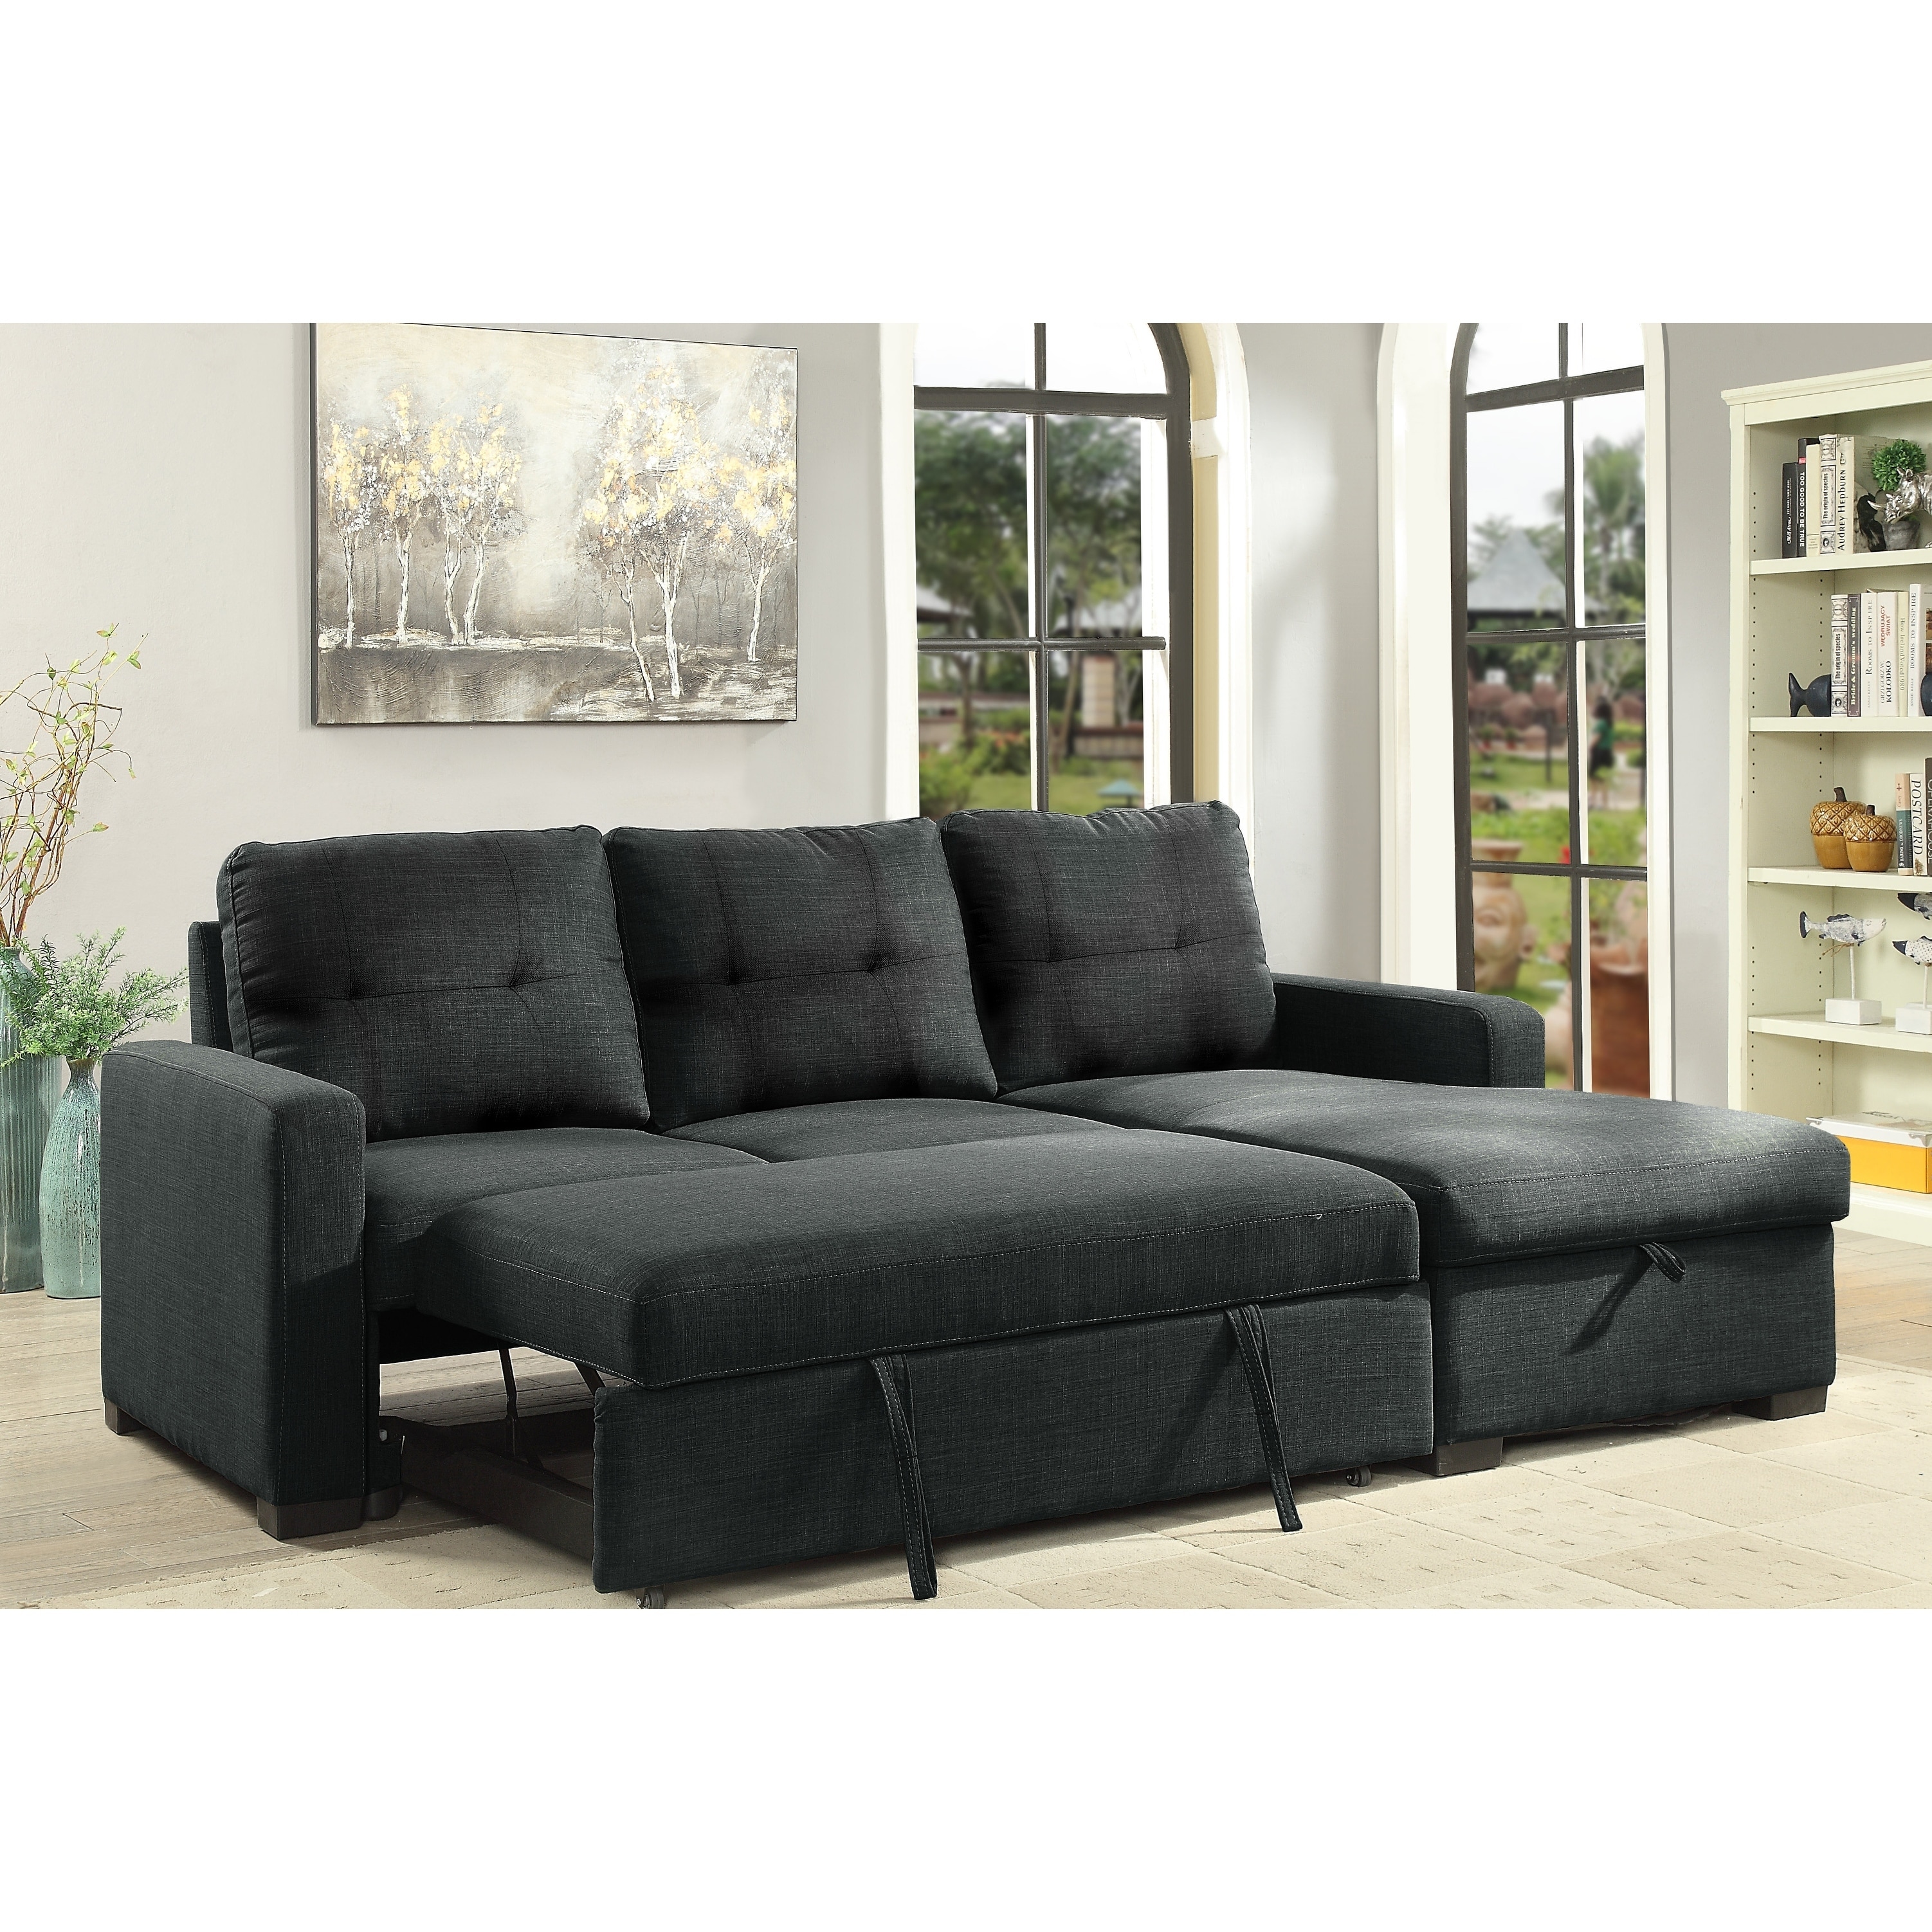 patron pendul farmaceut Boris Sectional with Pull Out Bed & Storage Chaise, Grey - Overstock -  27988968